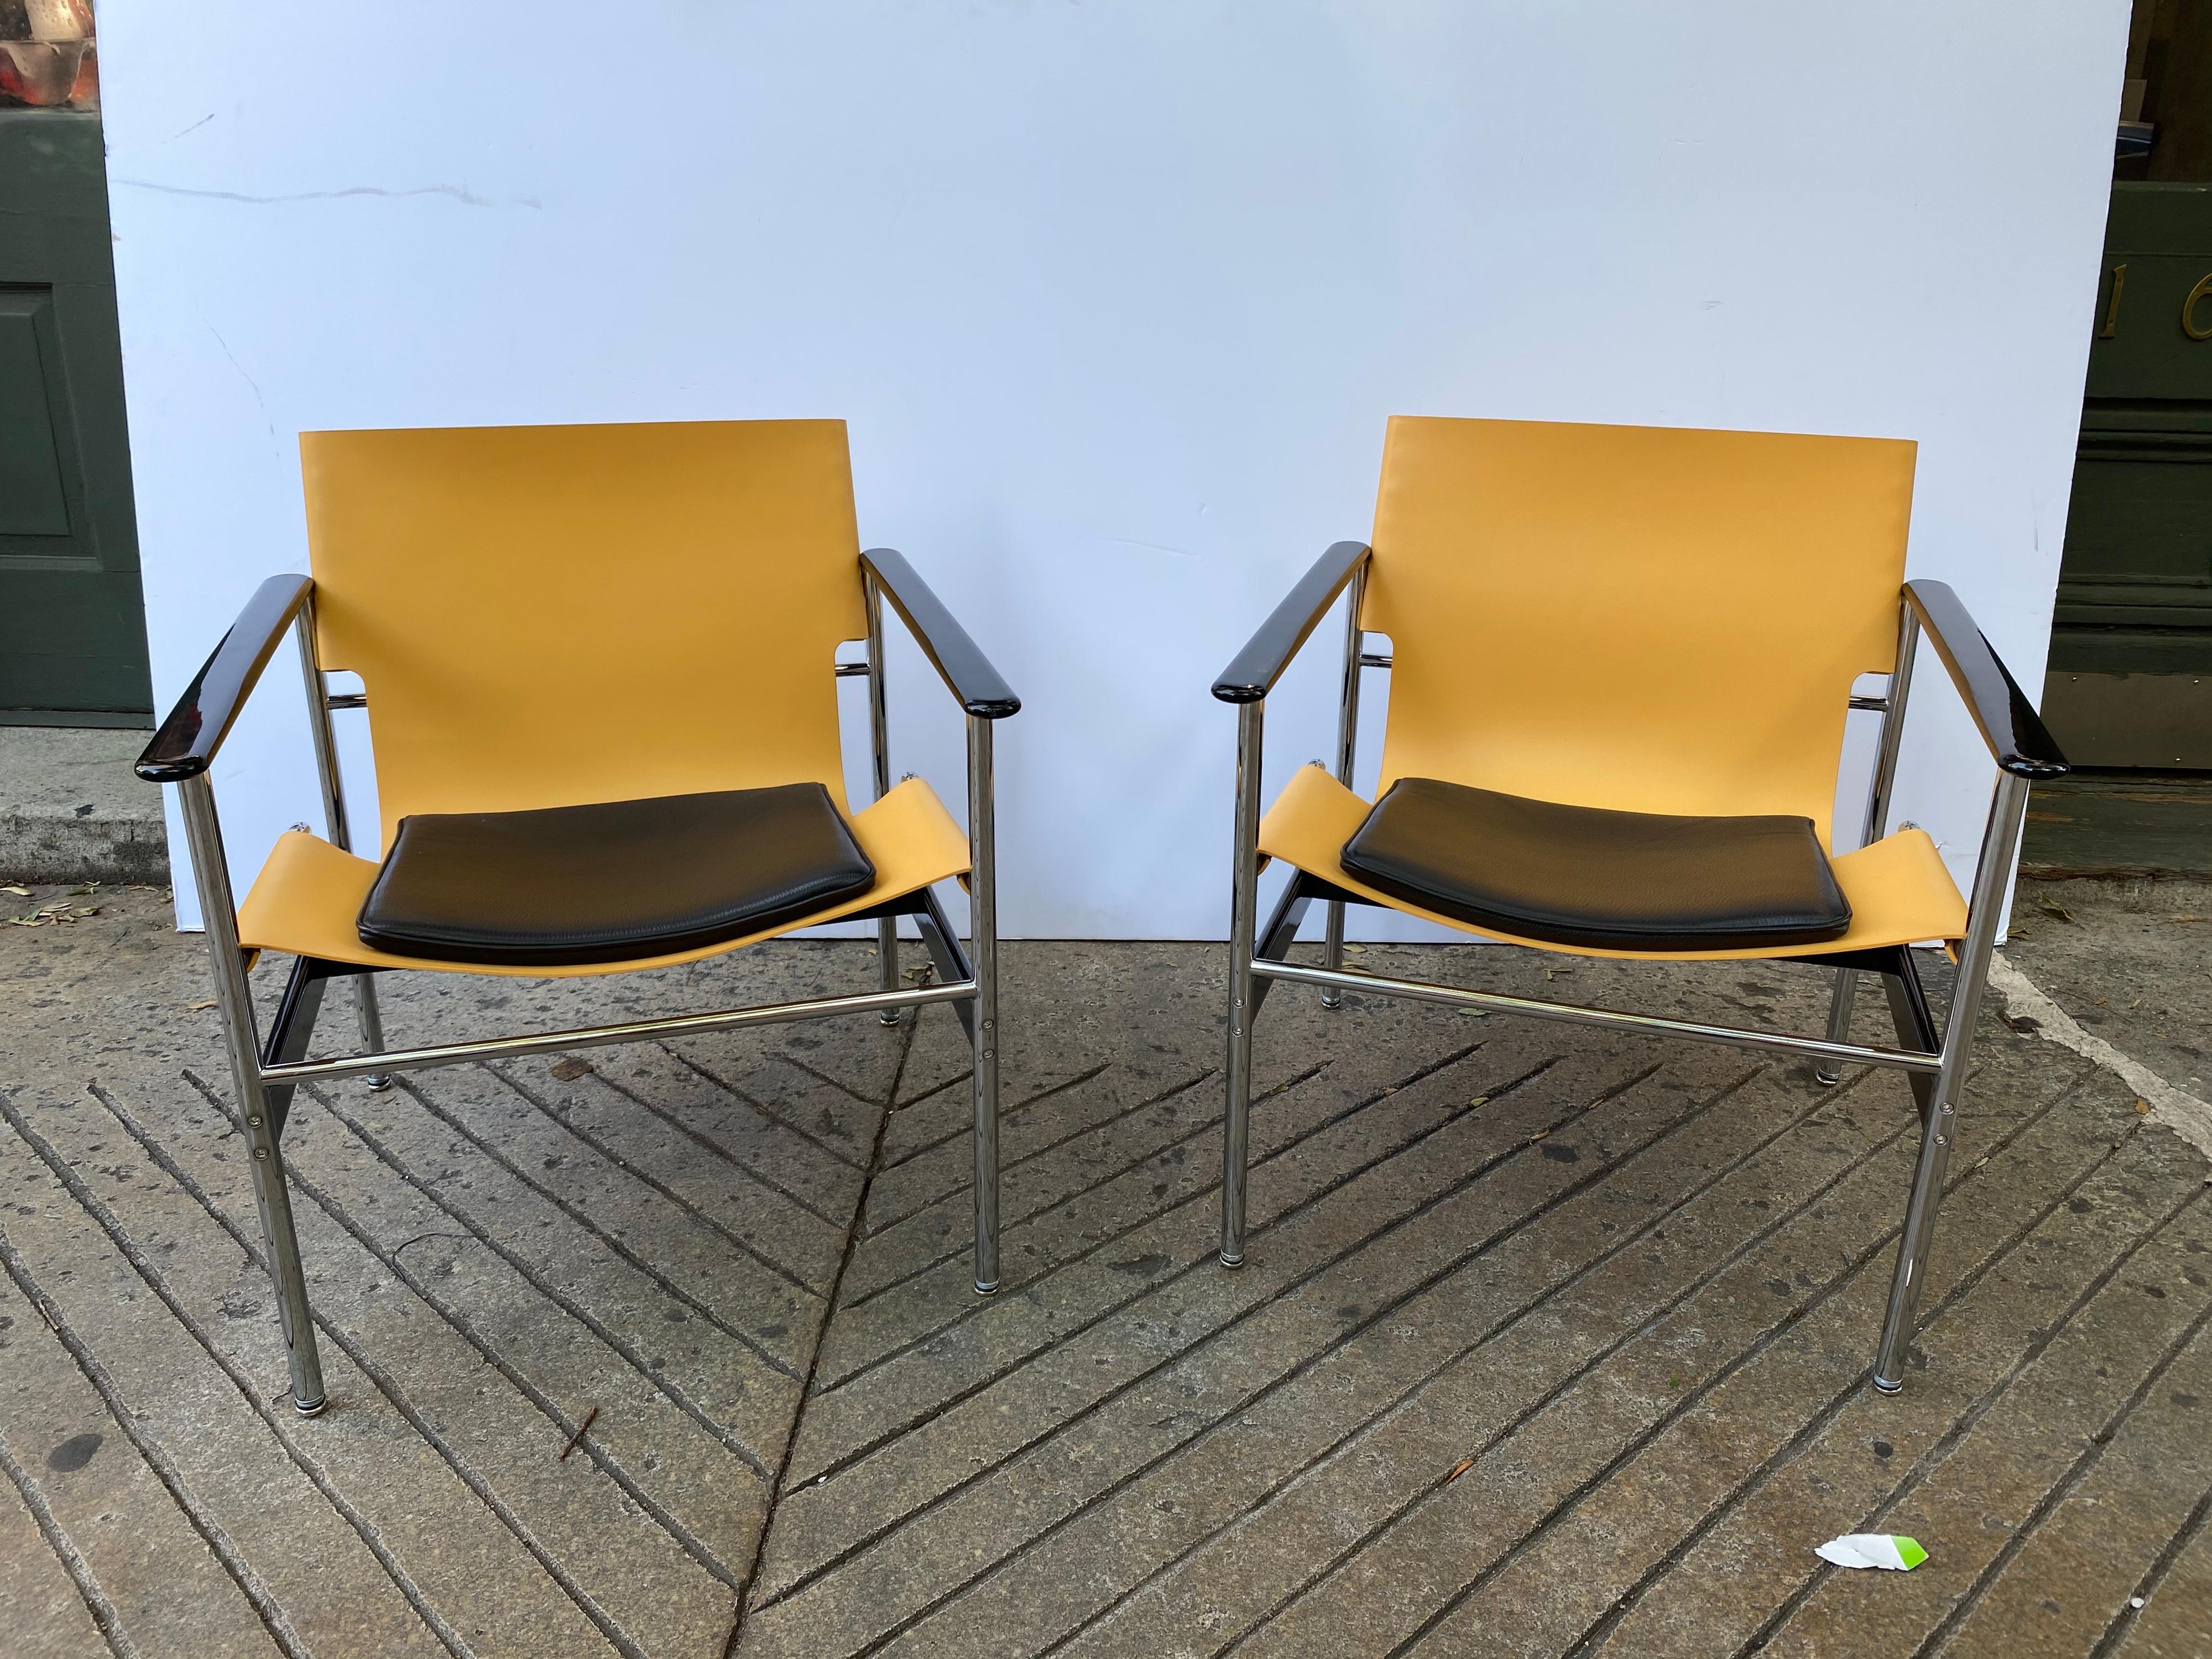 Pollack for Knoll leather sling chairs, first designed in 1960 and reintroduced by knoll about 6-7 years ago. These chairs are in new like condition! Extremely clean, near perfect! About 6 years old, tan slings with a black seat pad. Beautiful